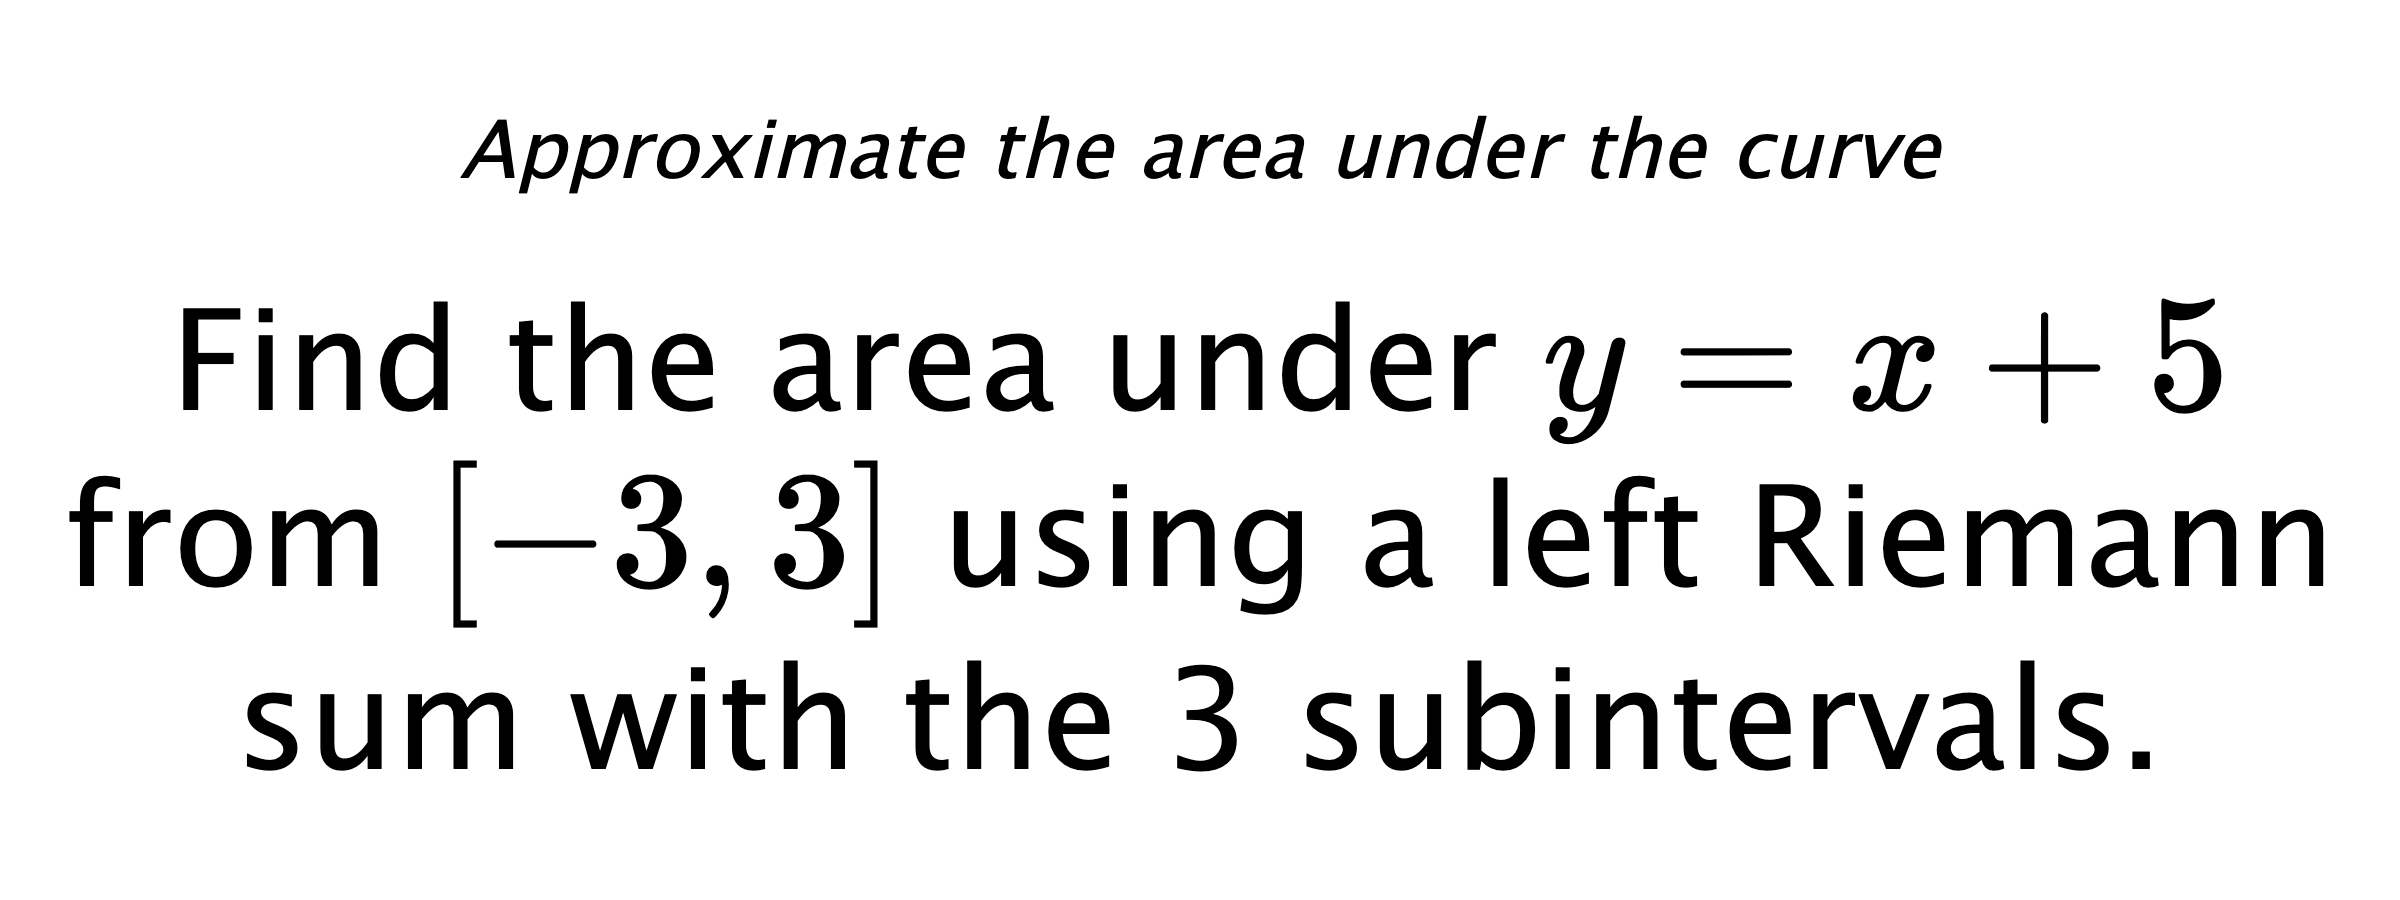 Approximate the area under the curve Find the area under $ y=x+5 $ from $ [-3,3] $ using a left Riemann sum with the 3 subintervals.